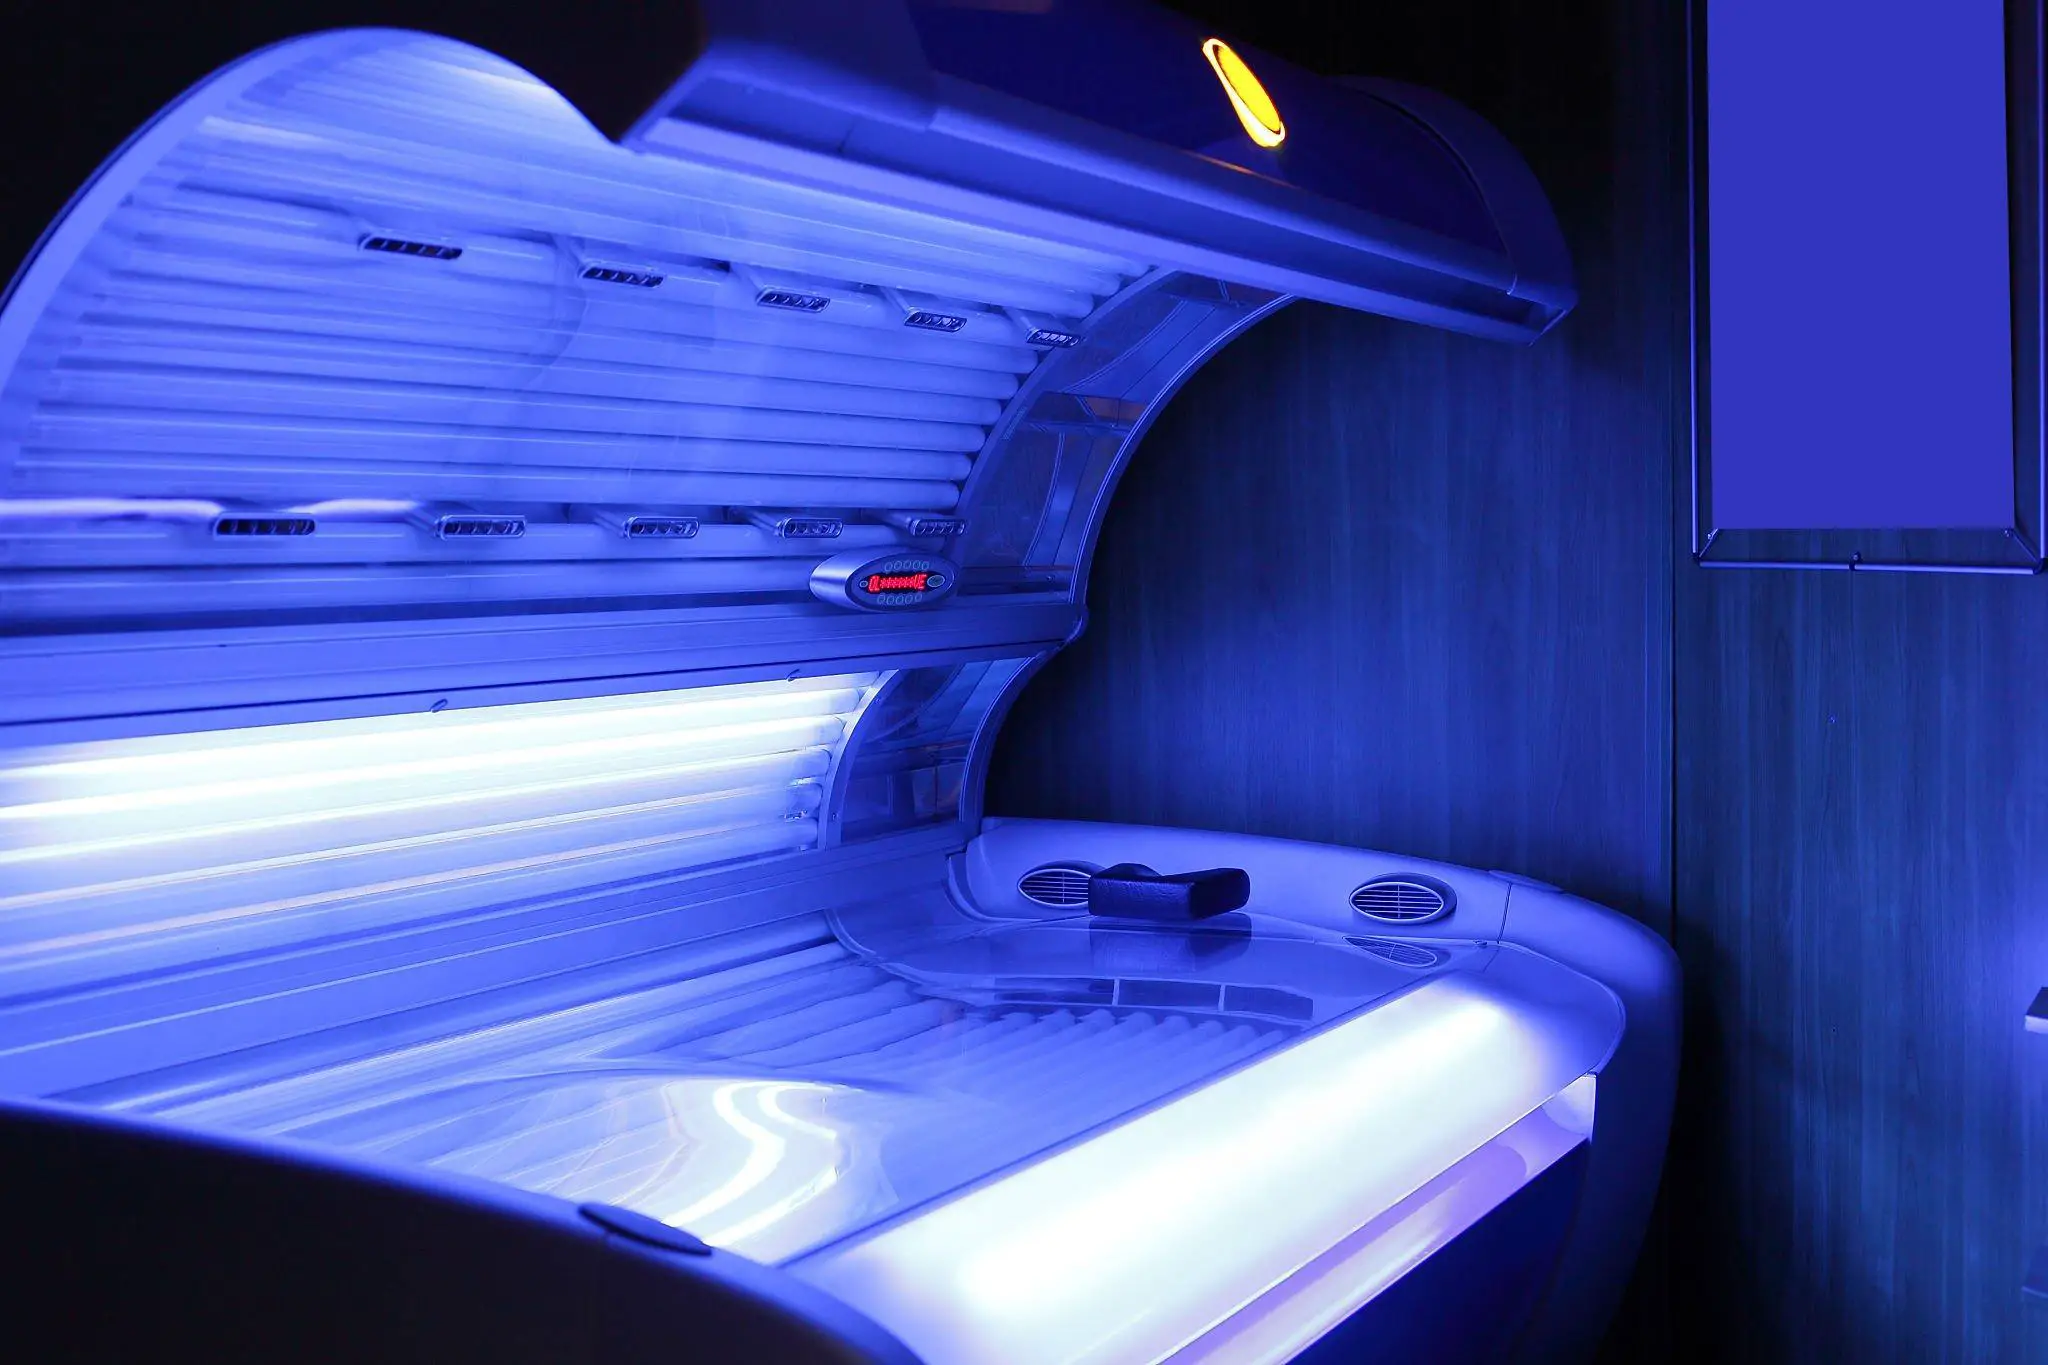 How Long in a Tanning Bed For Vitamin D?